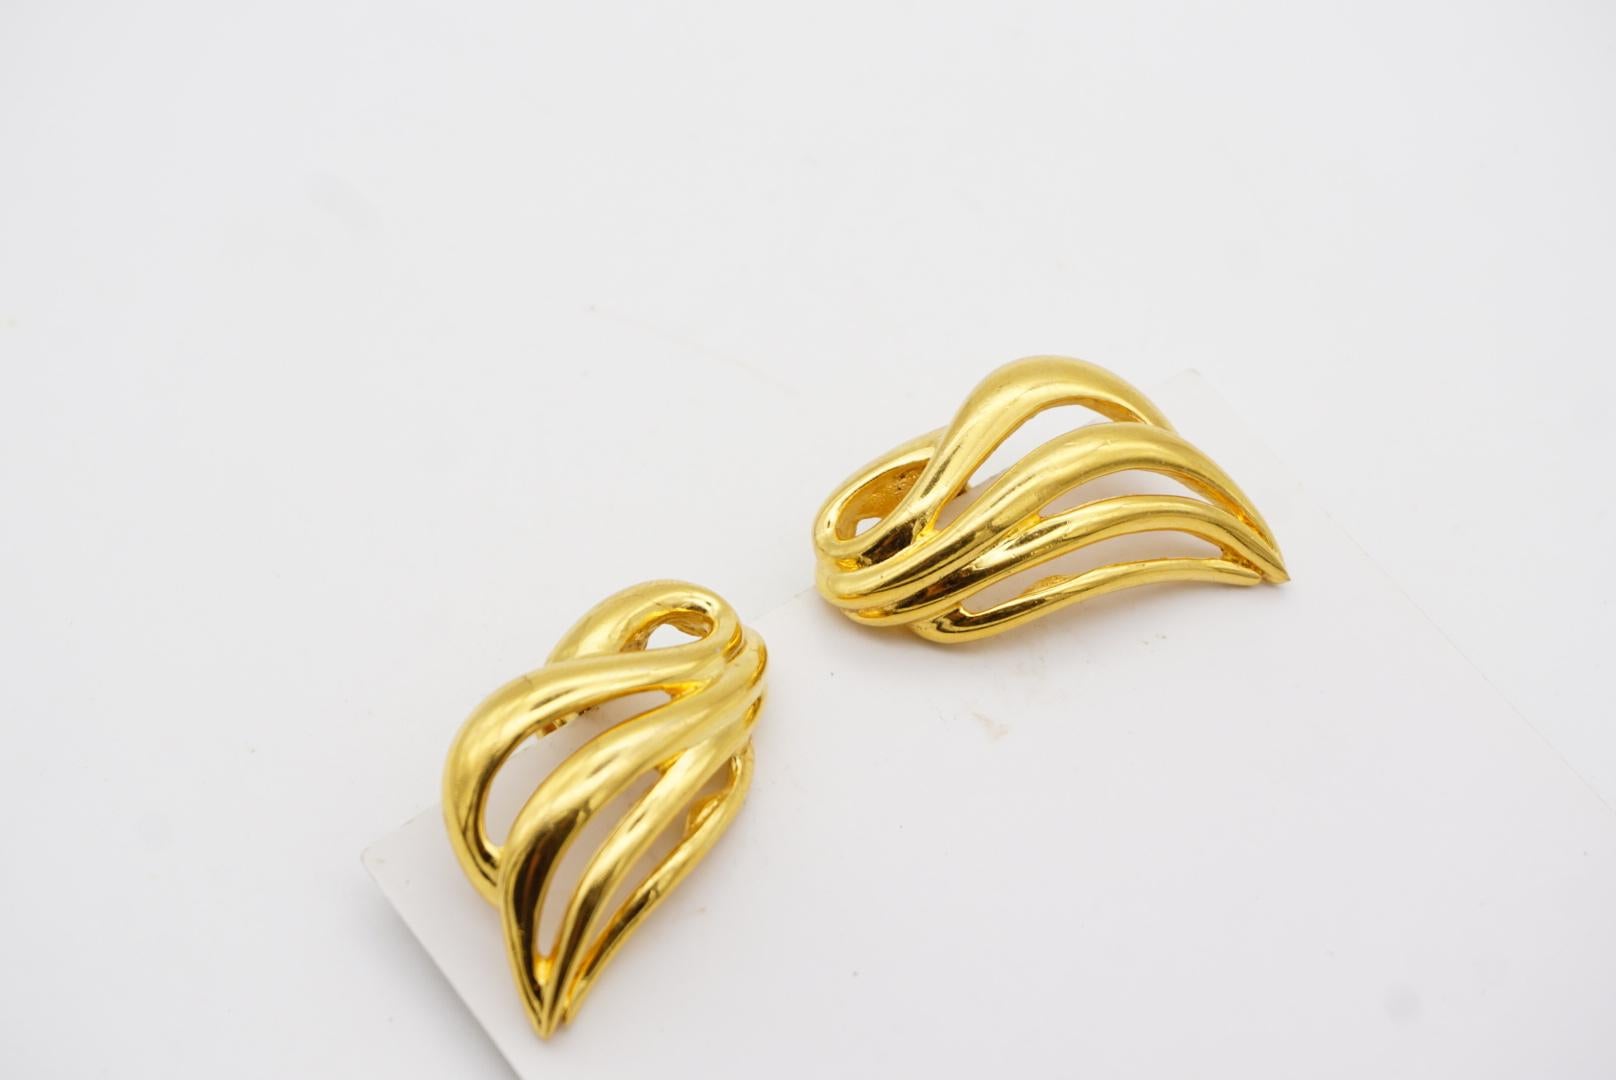 Monet Vintage 1970s Classic Openwork Wing Fire Leaf Elegant Gold Clip Earrings For Sale 1